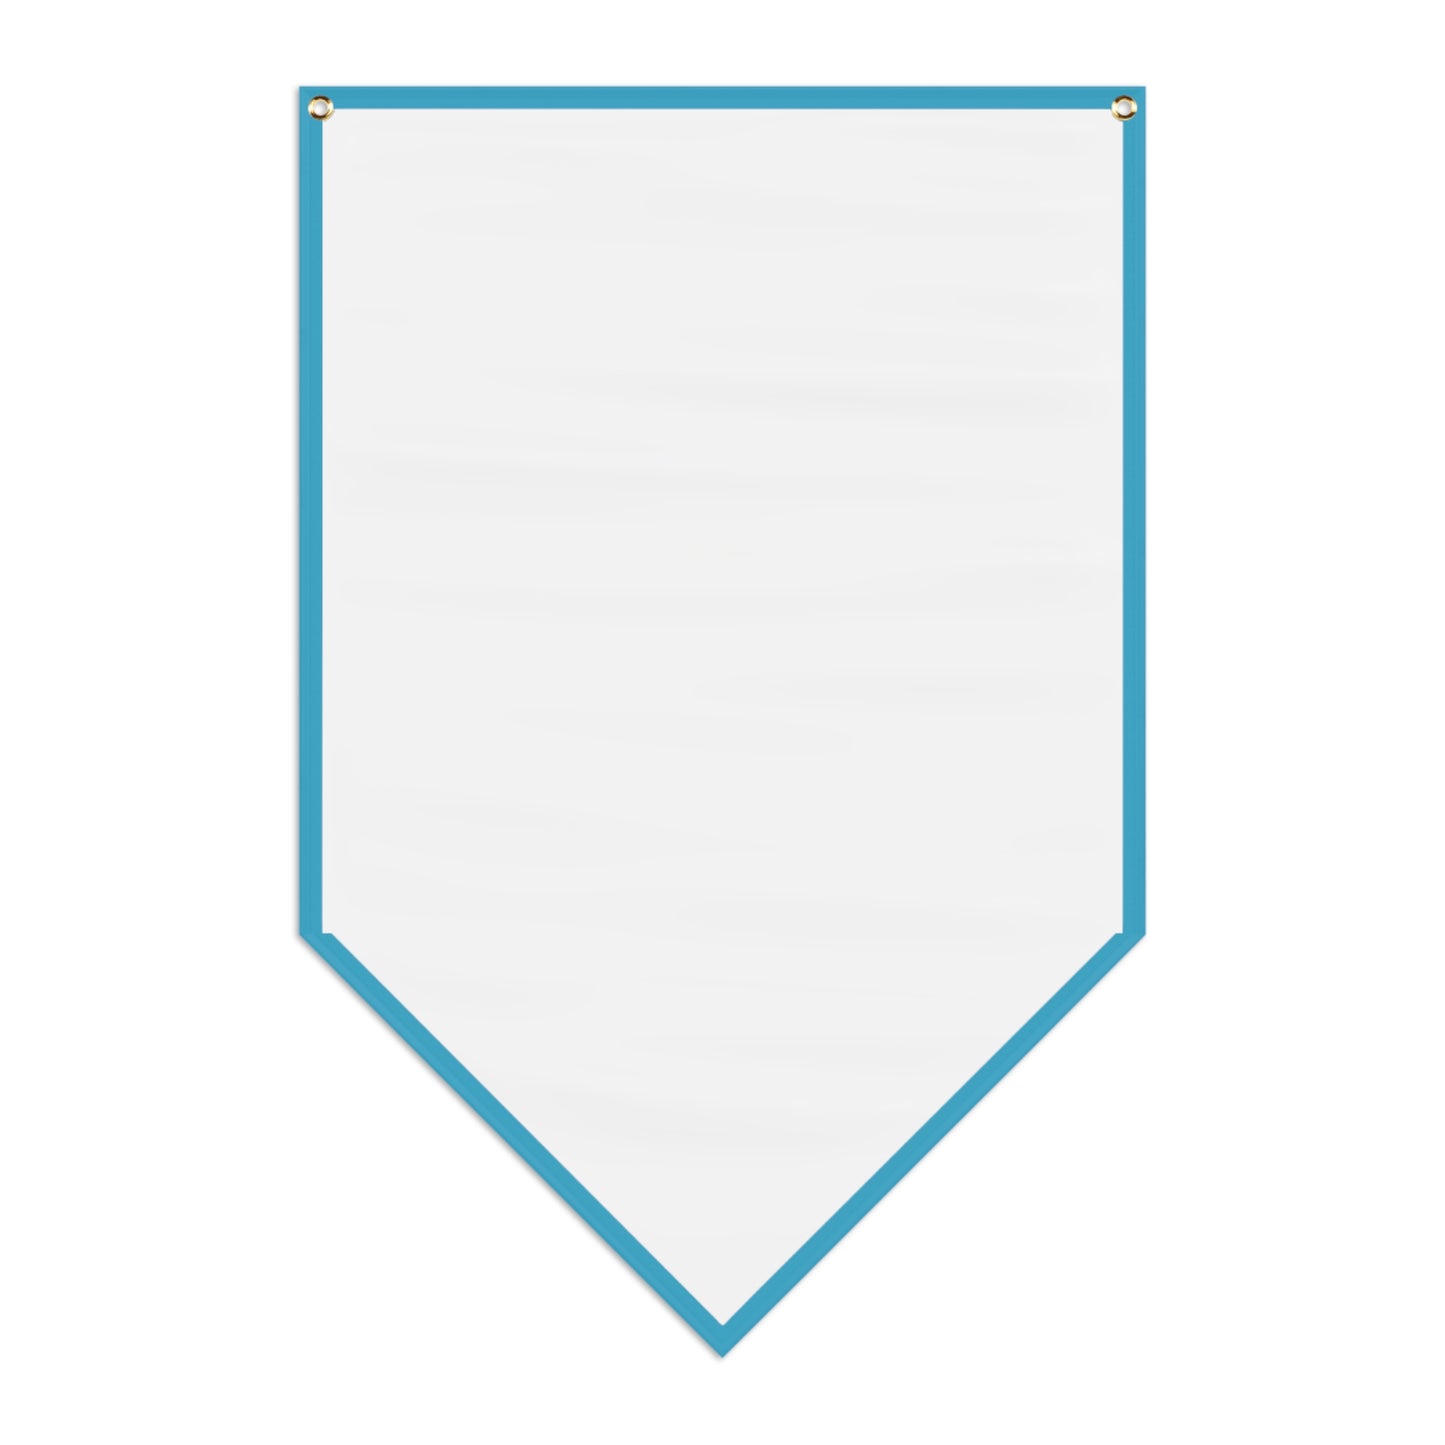 CPE NATIONALS Pennant Banner